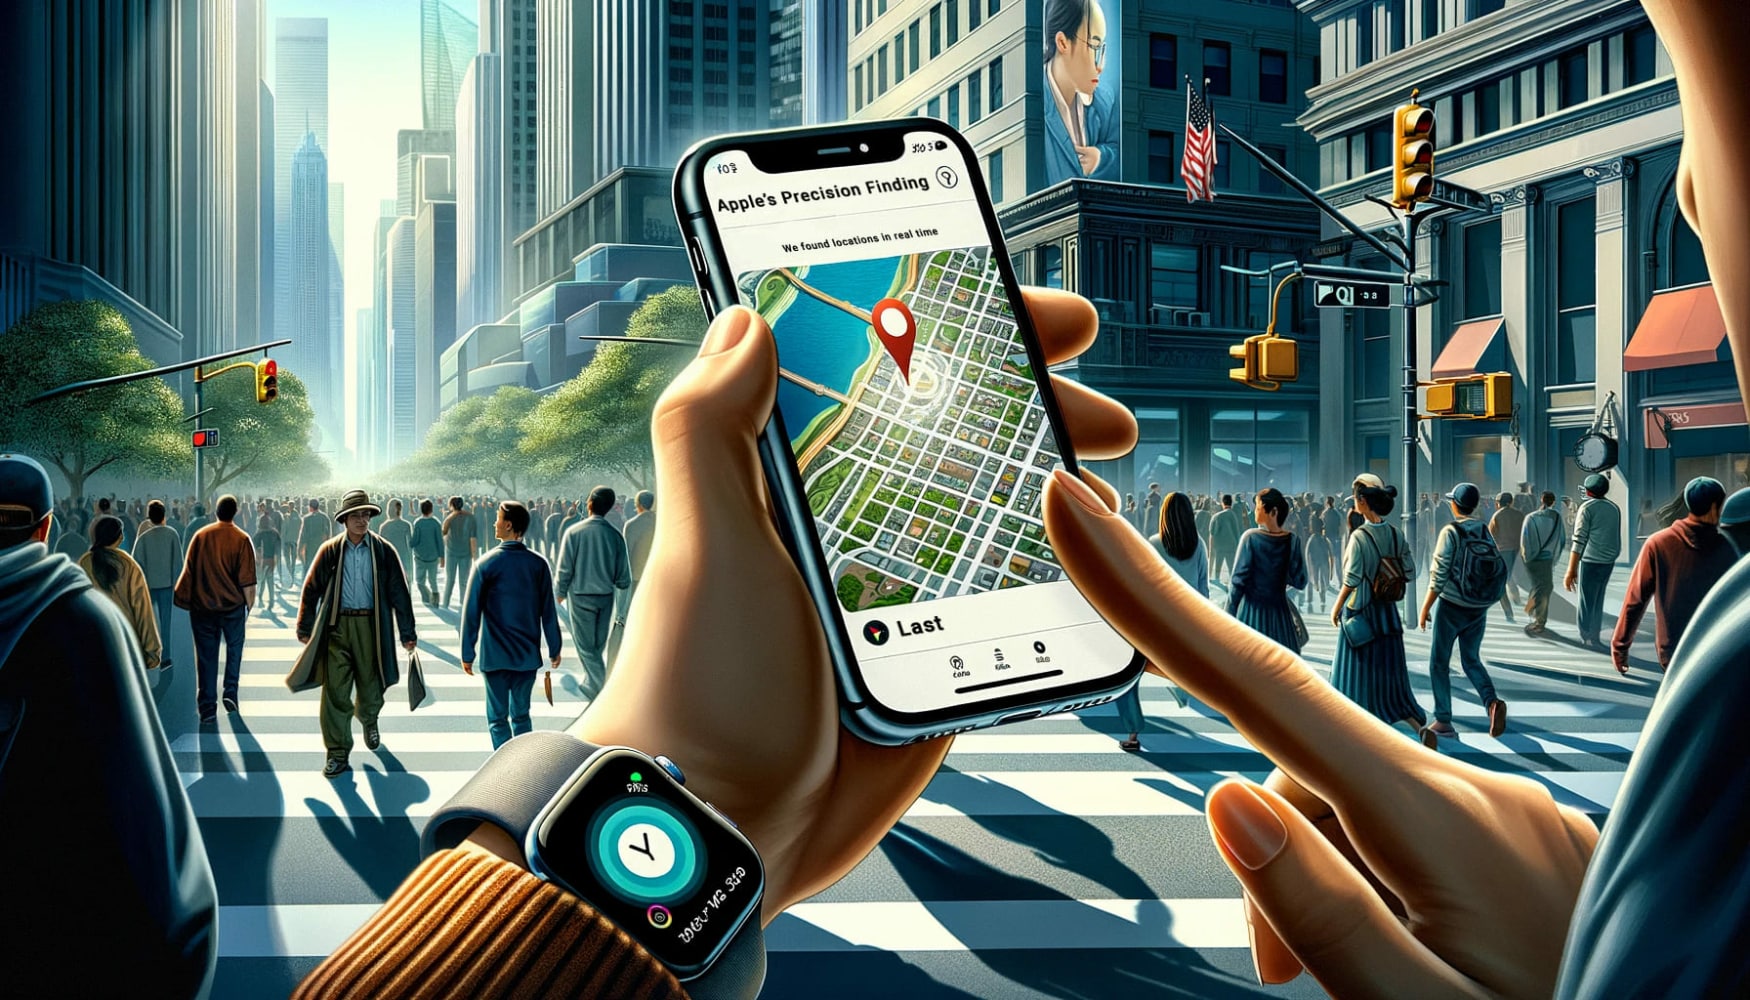 a man in a city among many people holds an iphone on which a map with a location icon is displayed